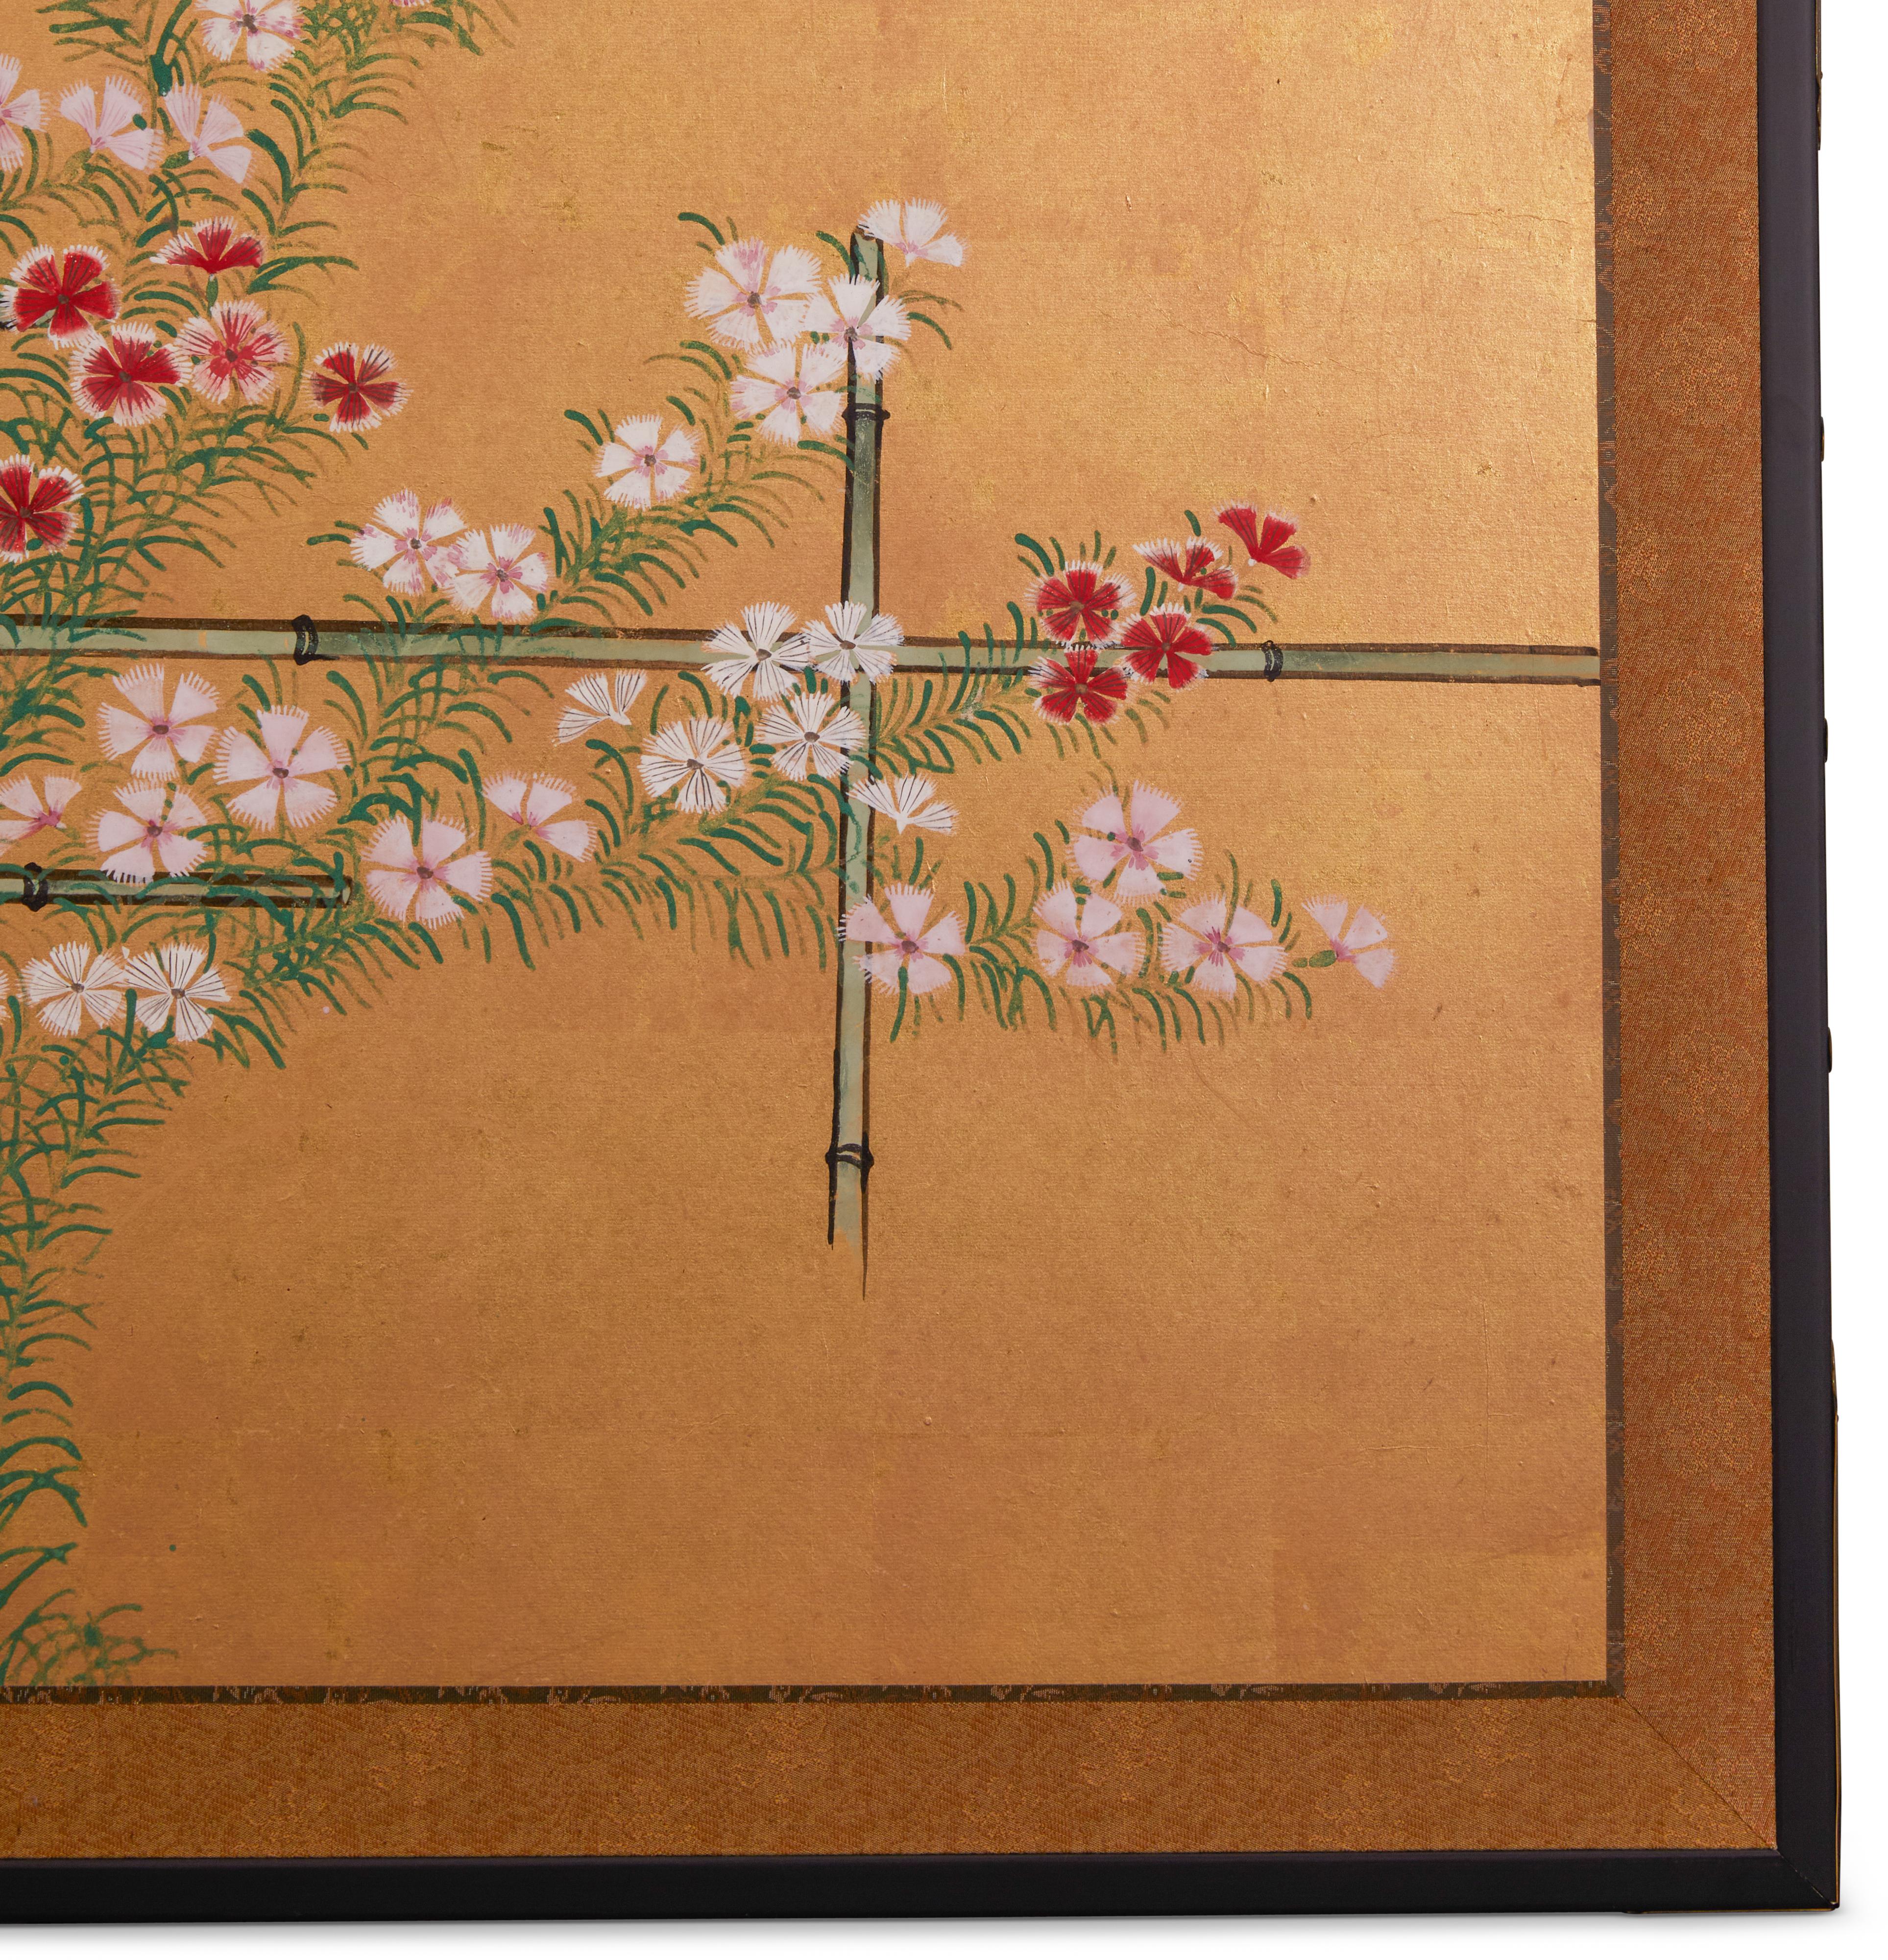 Nadeshiko, also known as fringed pinks is a flowering plant native to Japan.  Ink, mineral pigments and 18th century gold leaf, with good veining, on mulberry paper.  Silk brocade border and black lacquer trim with bronze hardware.  